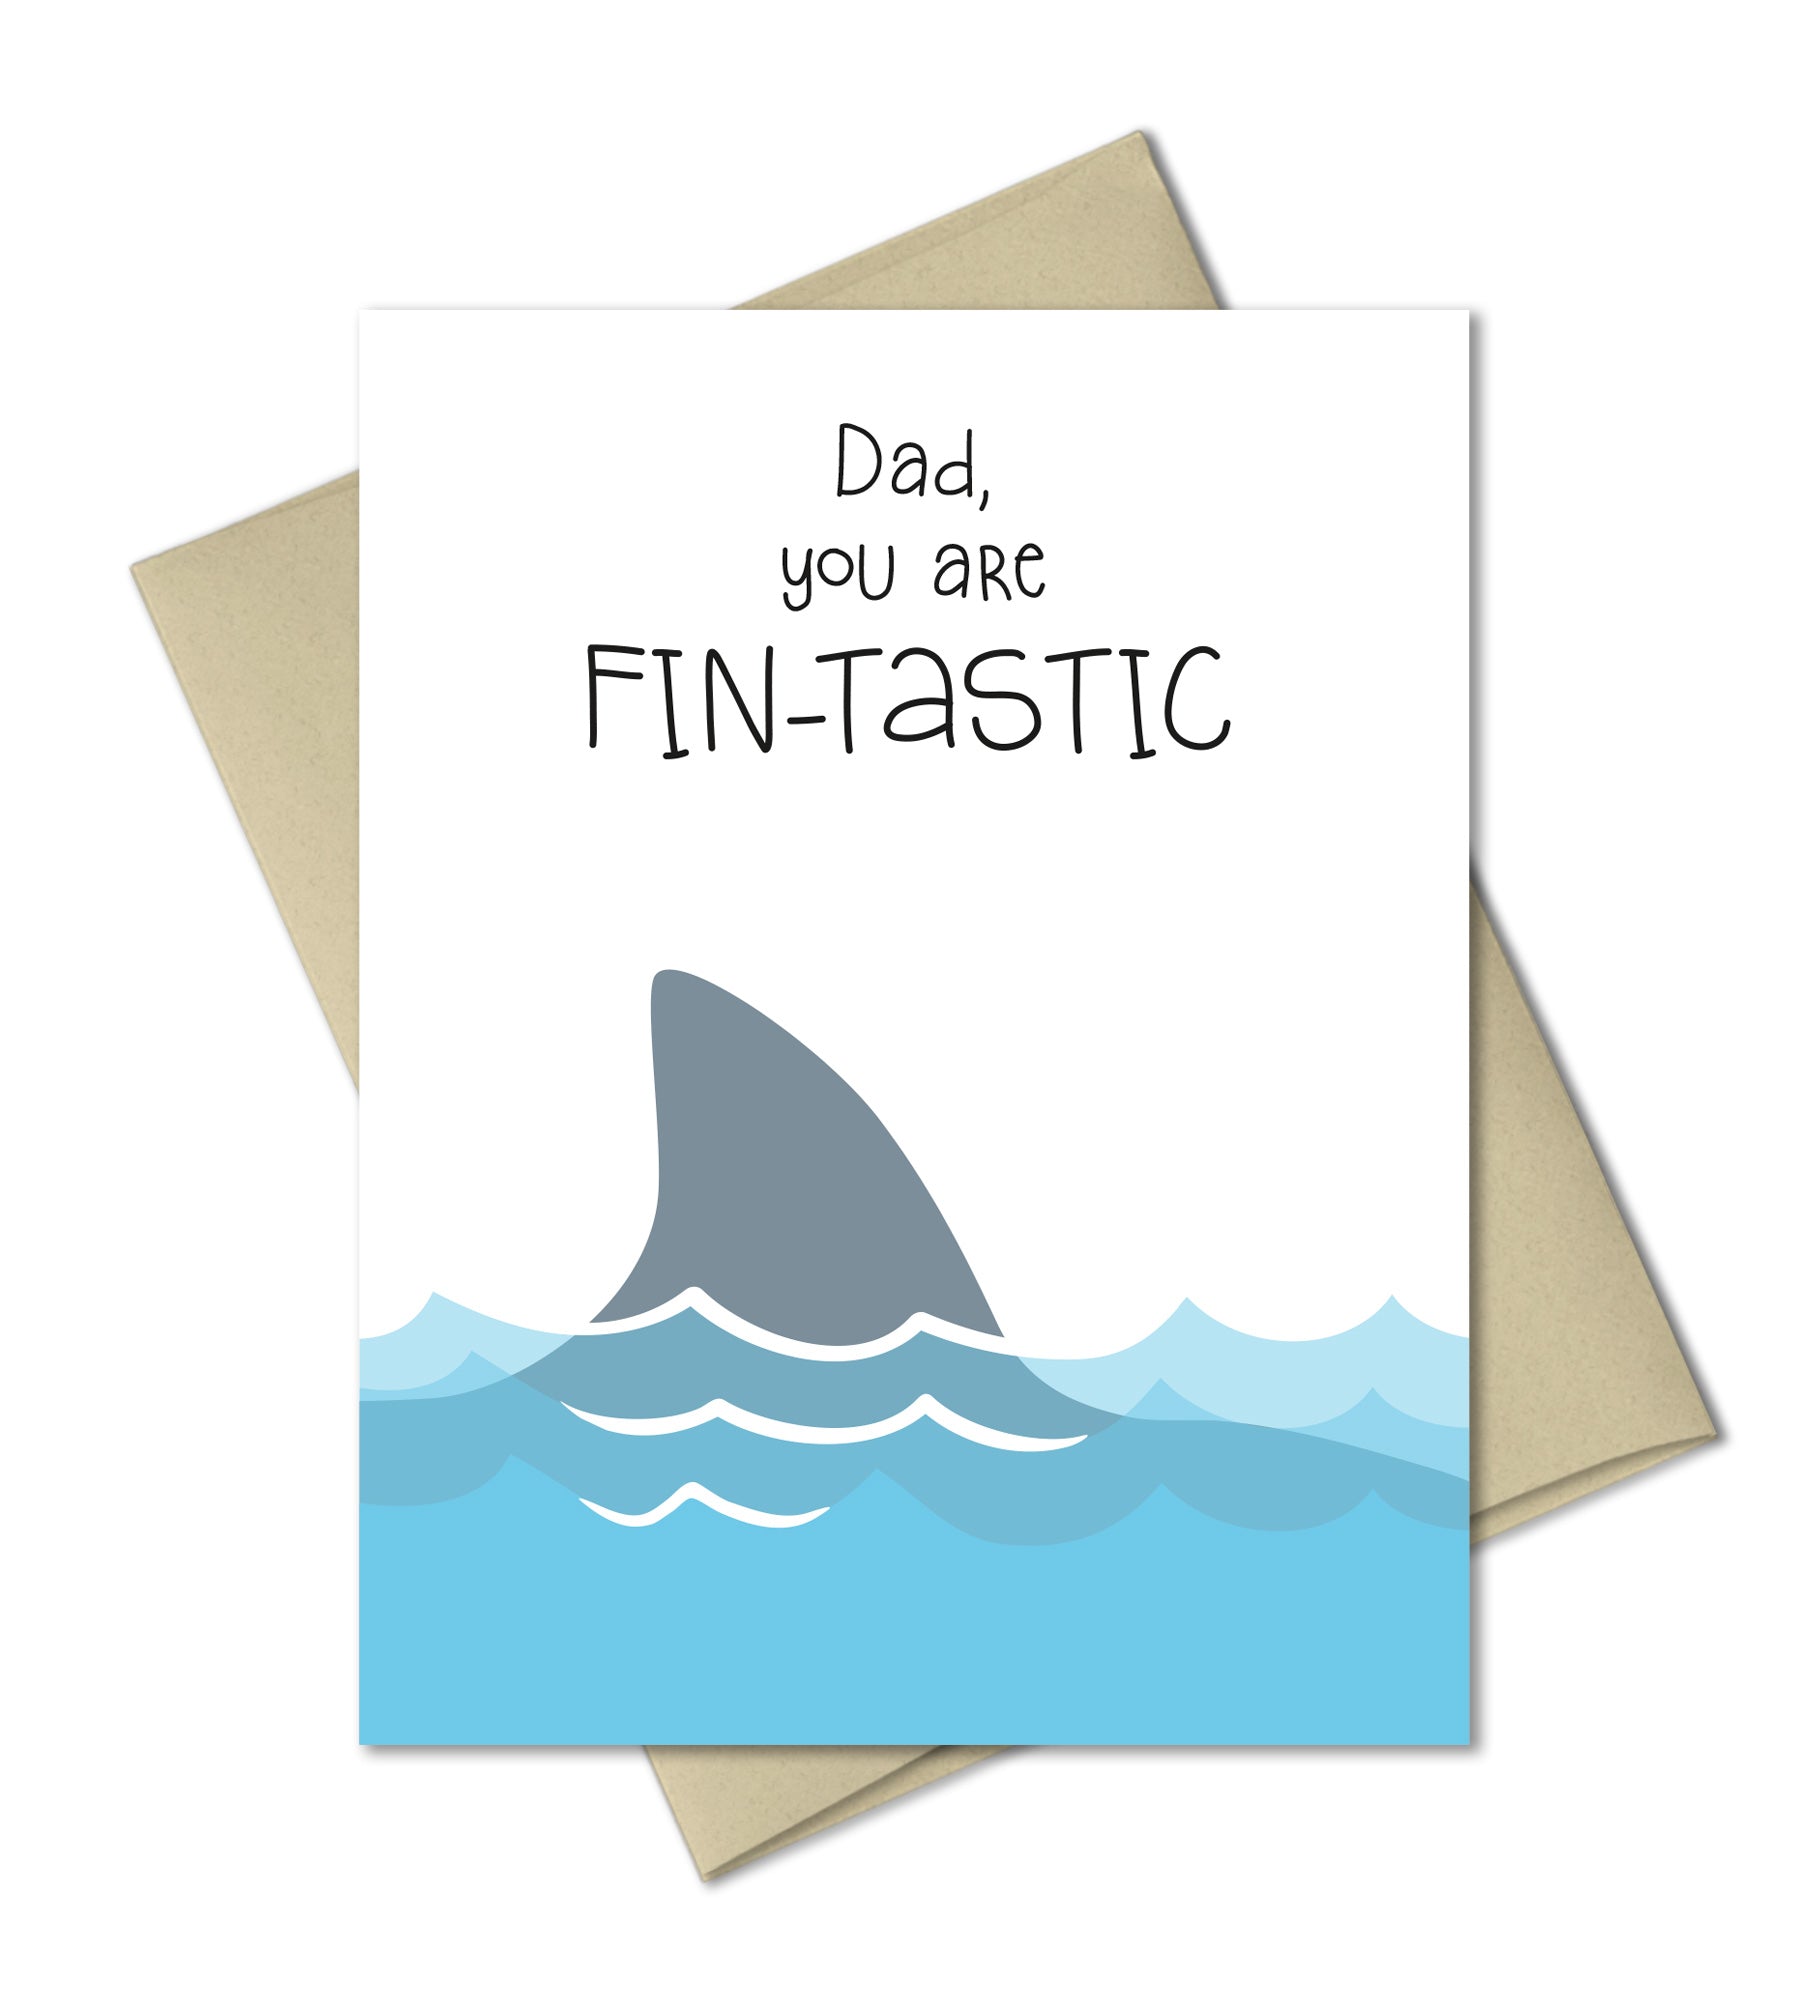 Funny Fathers Day Card - Fin-tastic Dad